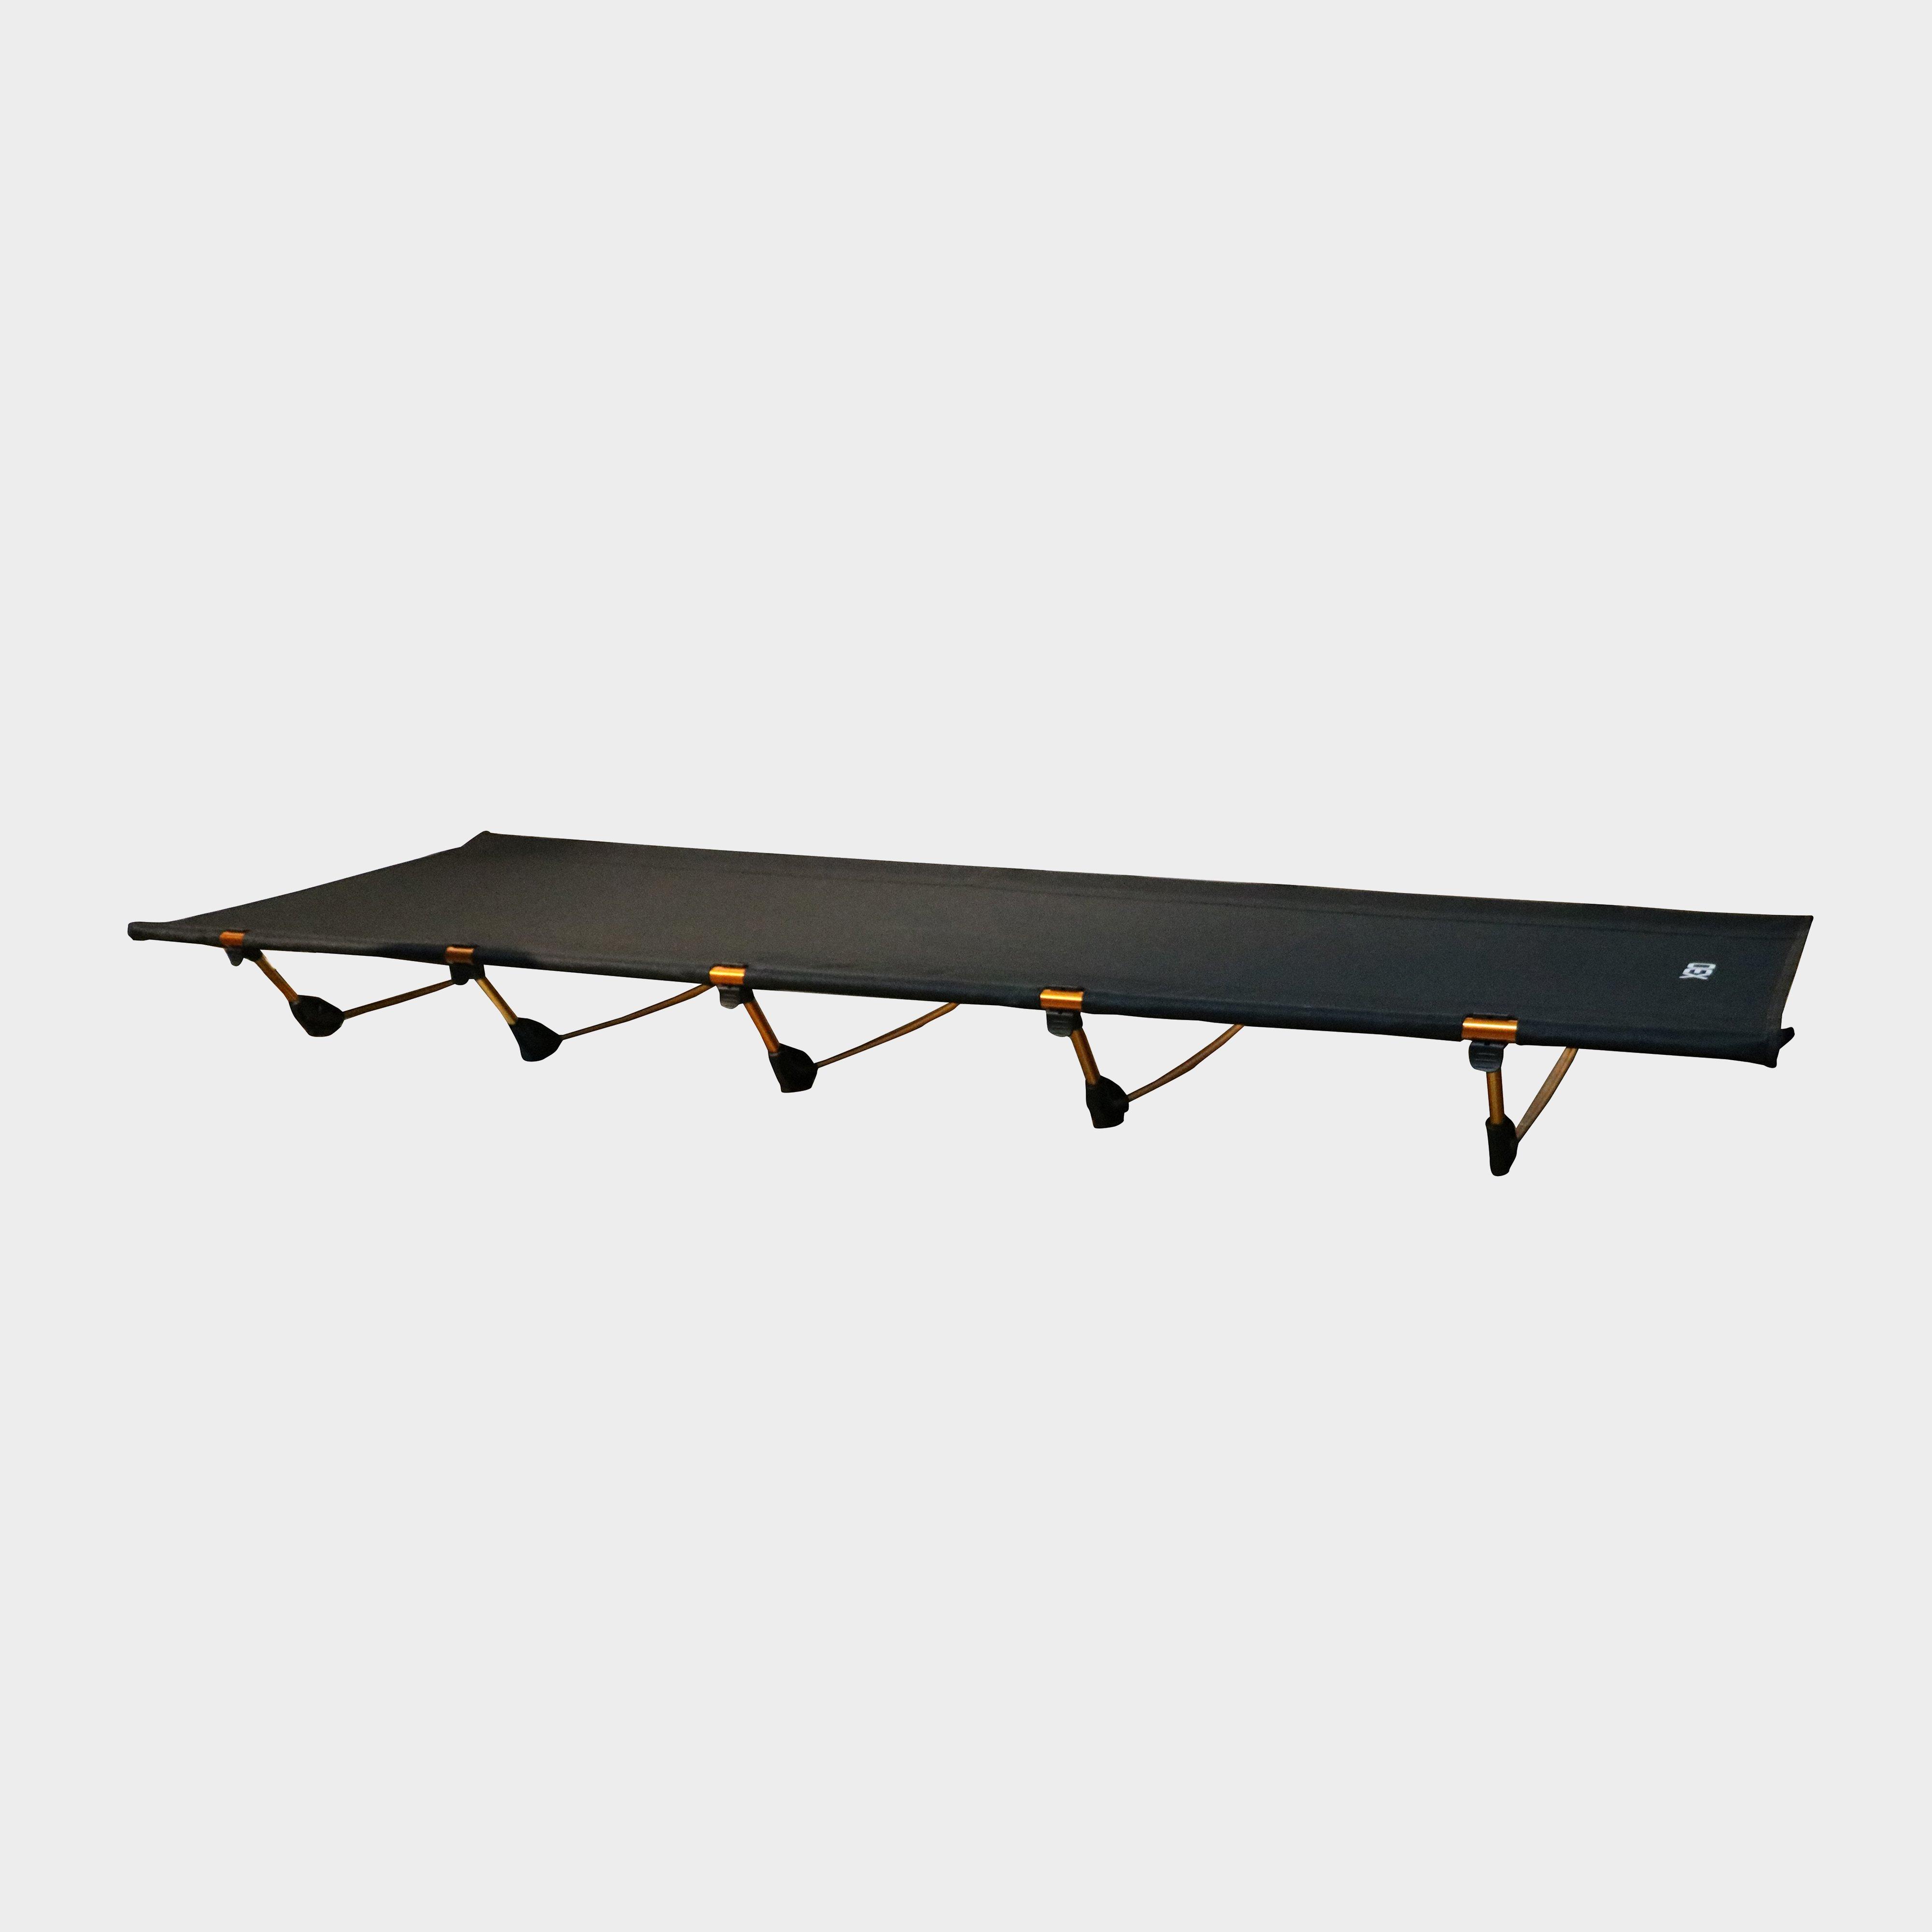 Photos - Outdoor Furniture OEX Ultralite Folding Cot, Black 